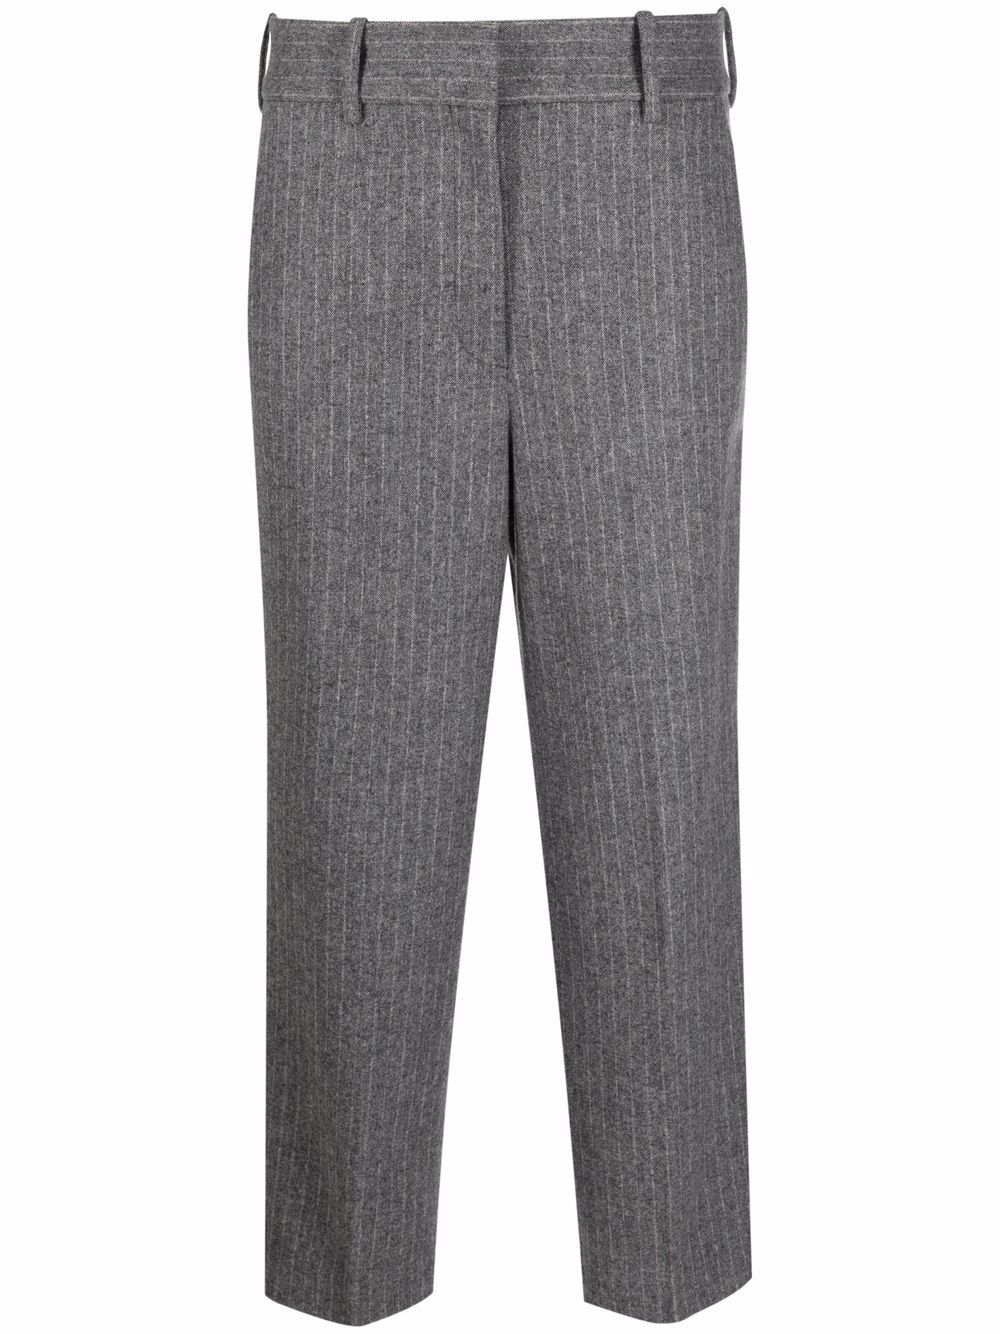 Image 1 of Circolo 1901 cropped pinstripe trousers